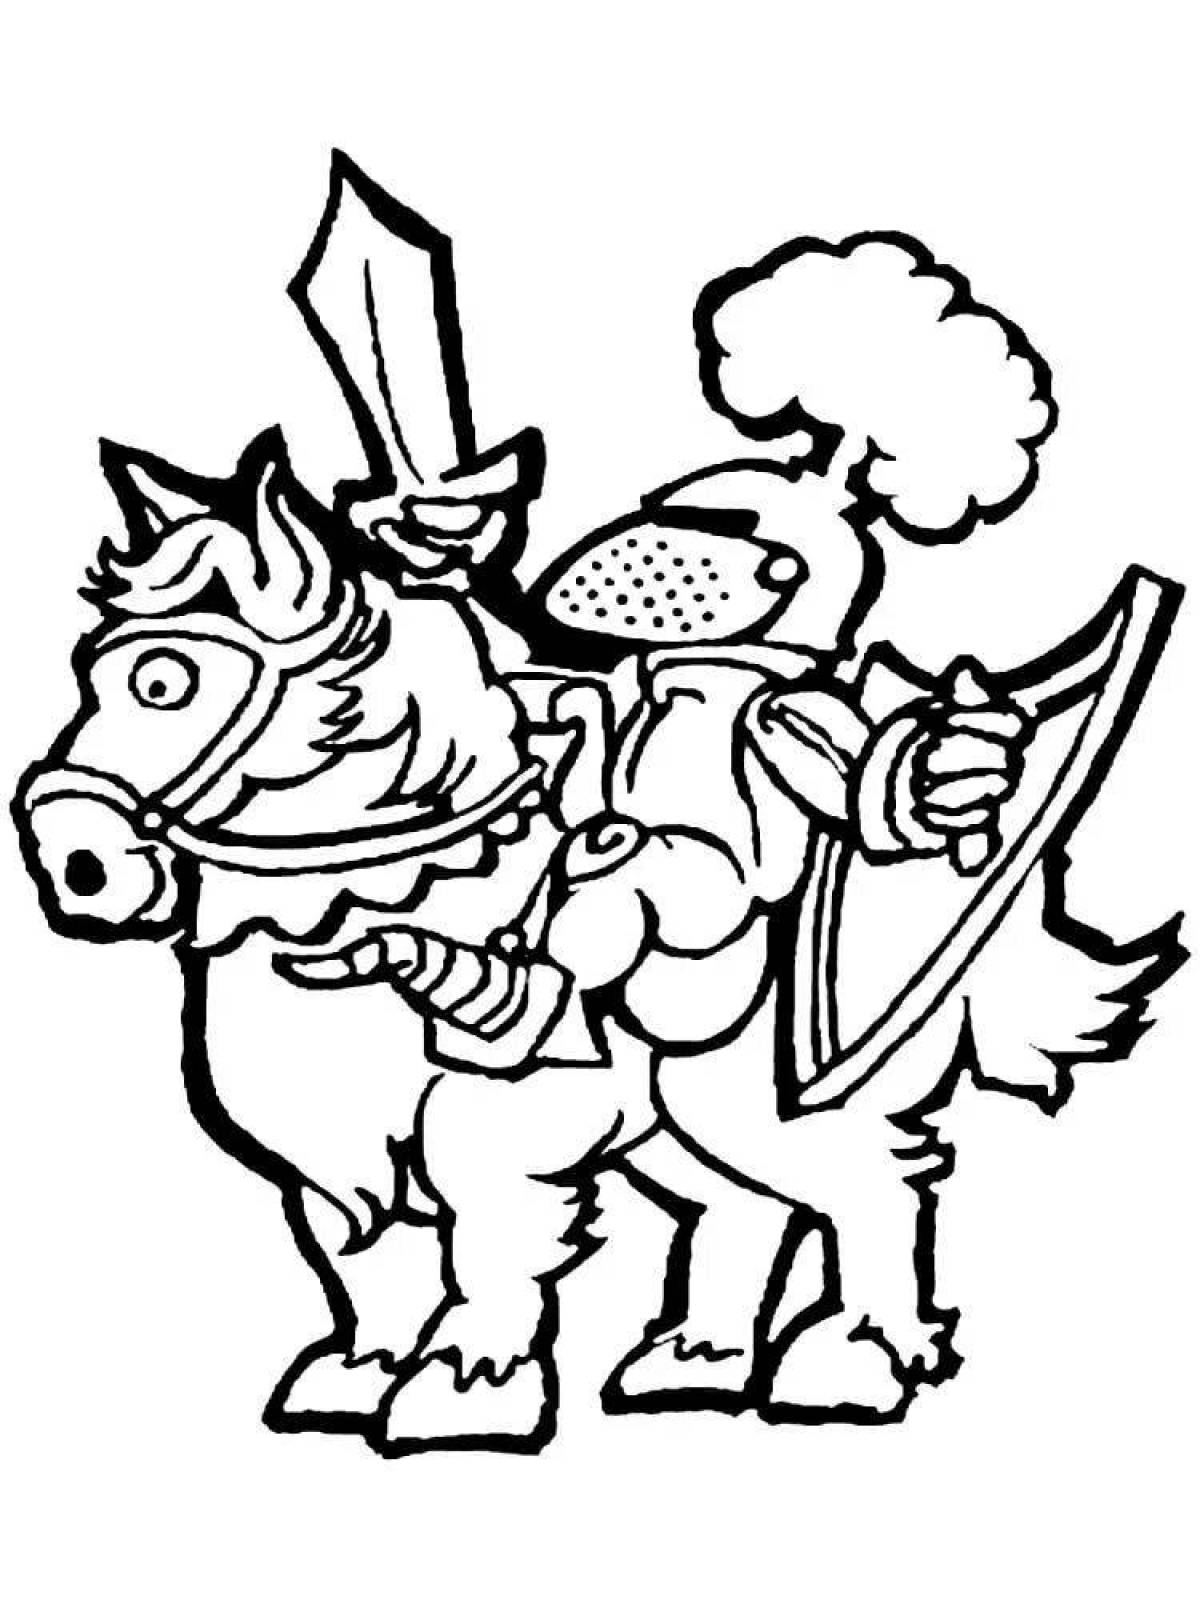 Great coloring book knight on horseback